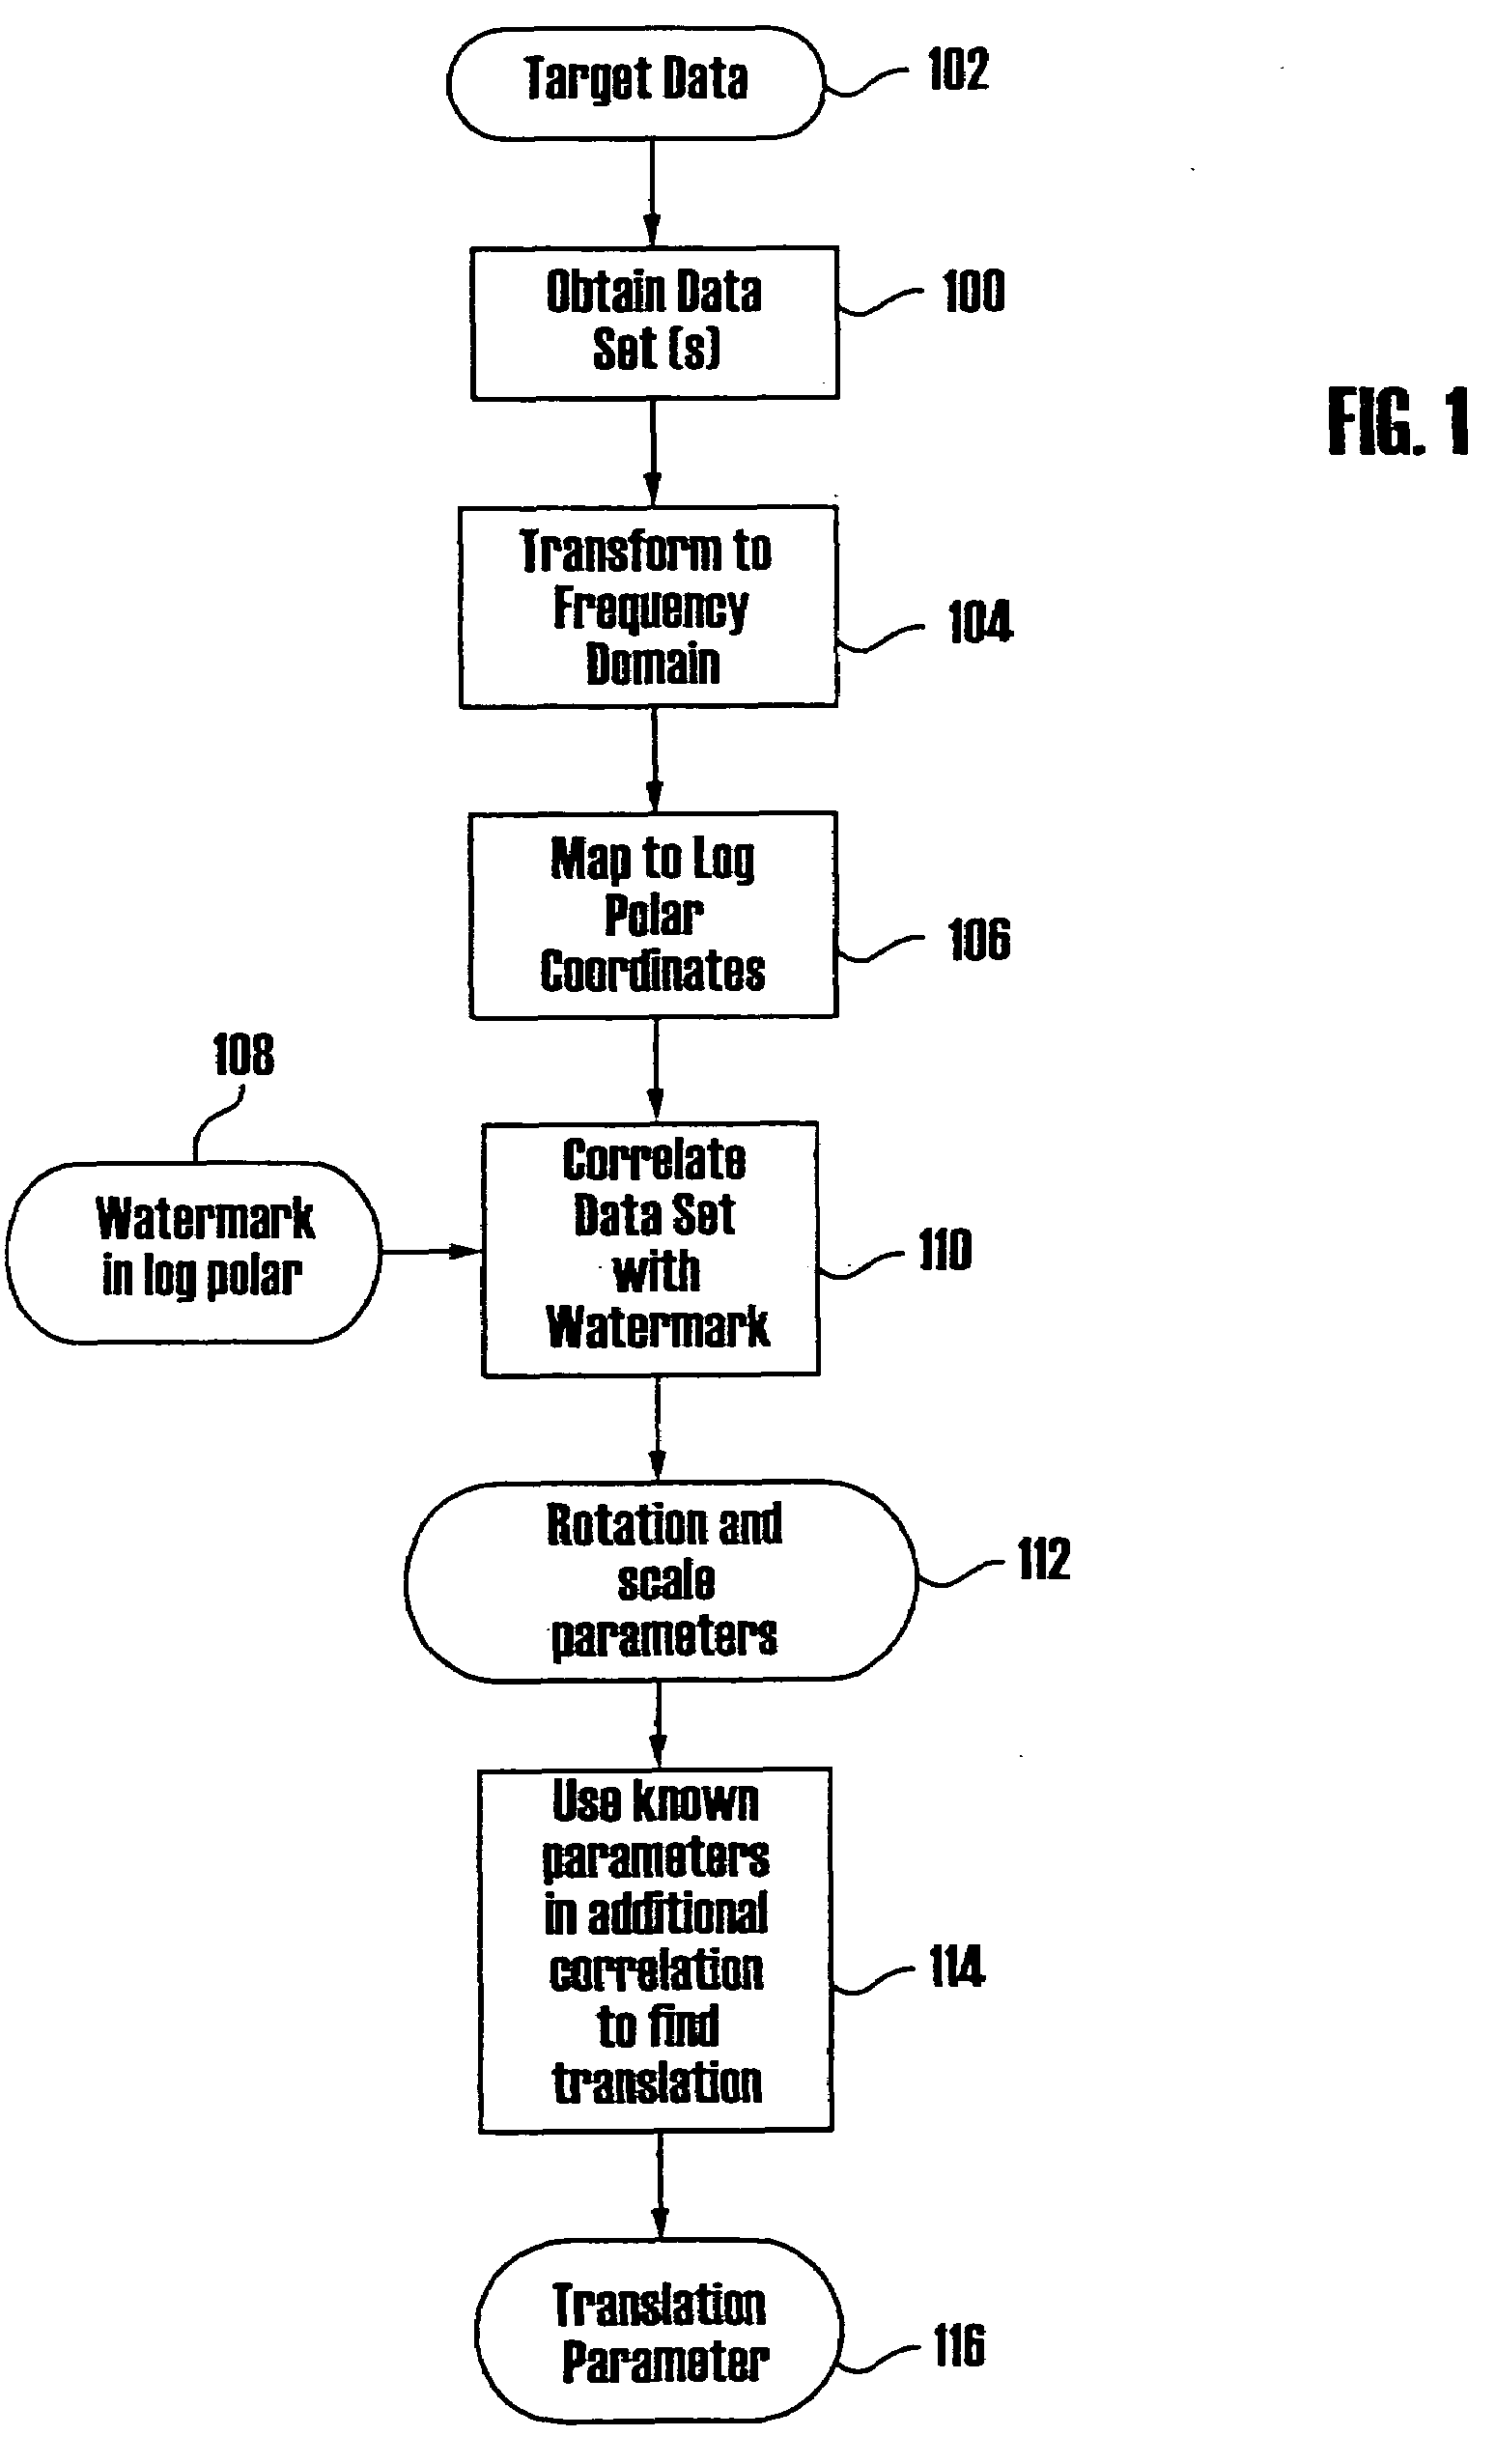 Image processing using embedded registration data to determine and compensate for geometric transformation